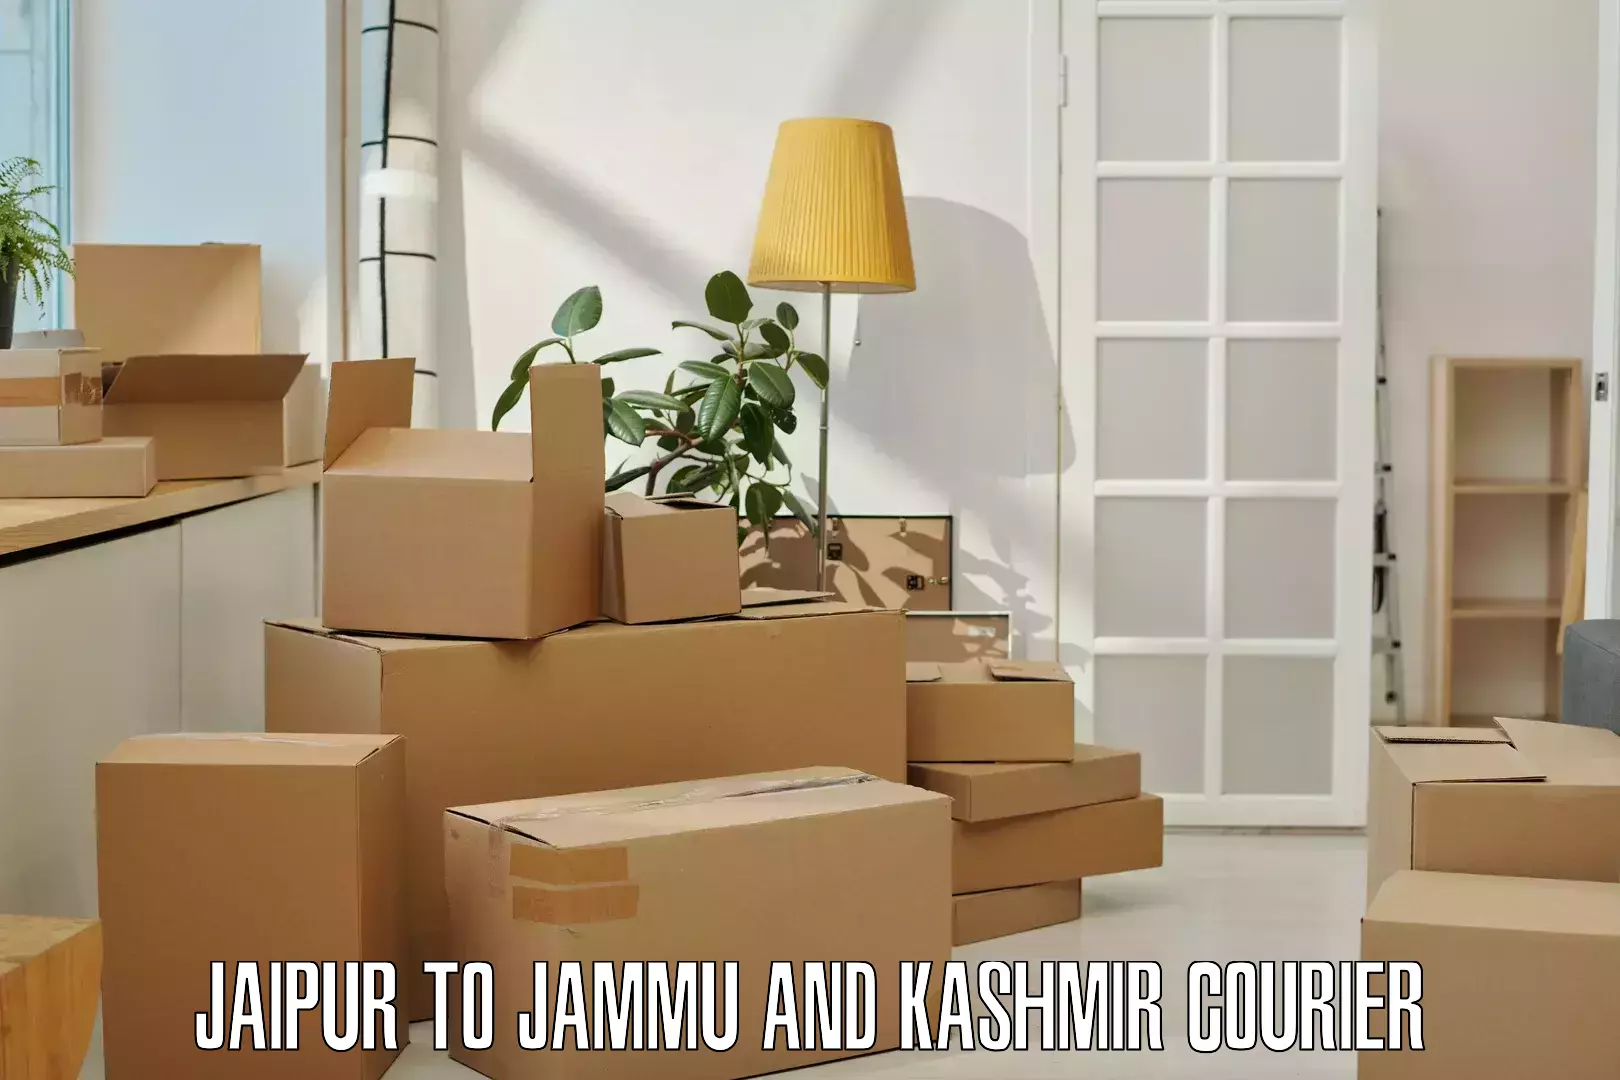 Reliable delivery network Jaipur to Jammu